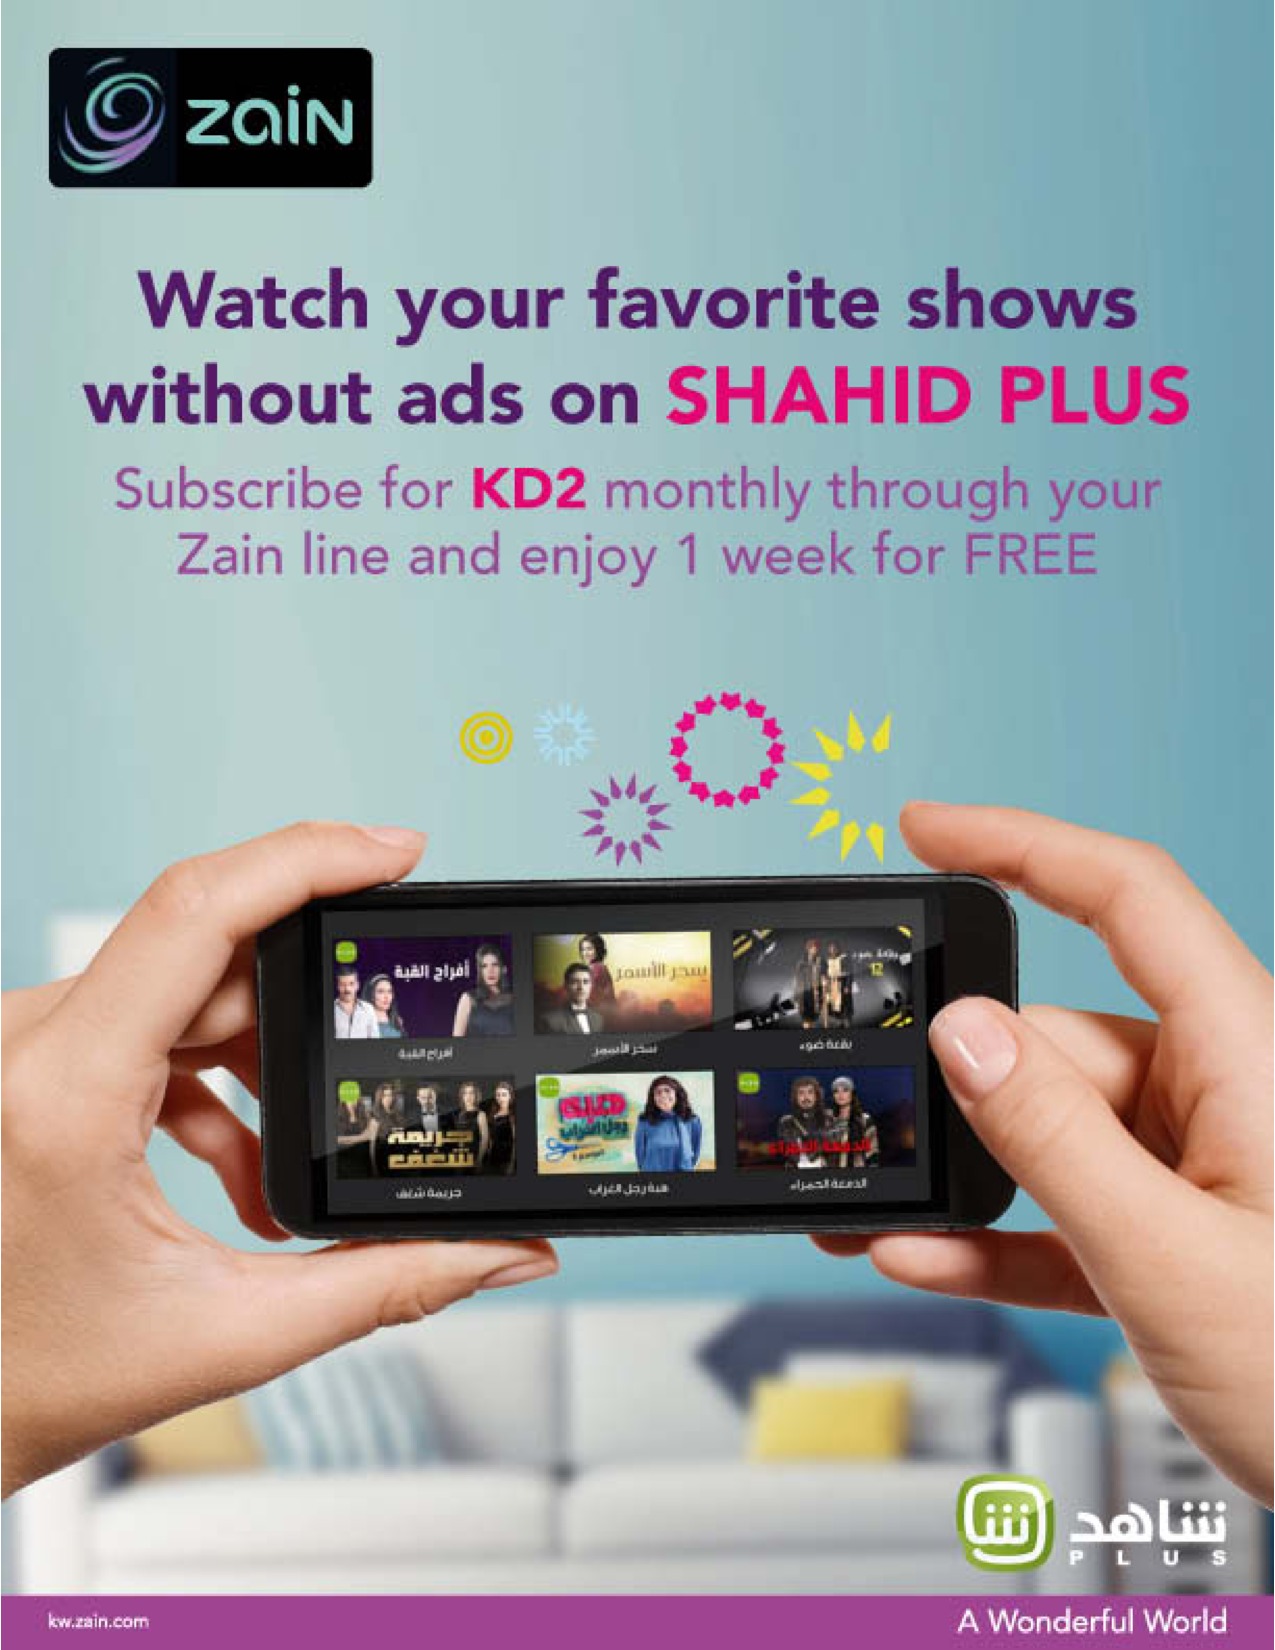 watch-your-favorite-shows-without-ads-on-shahid-plus-kuwait